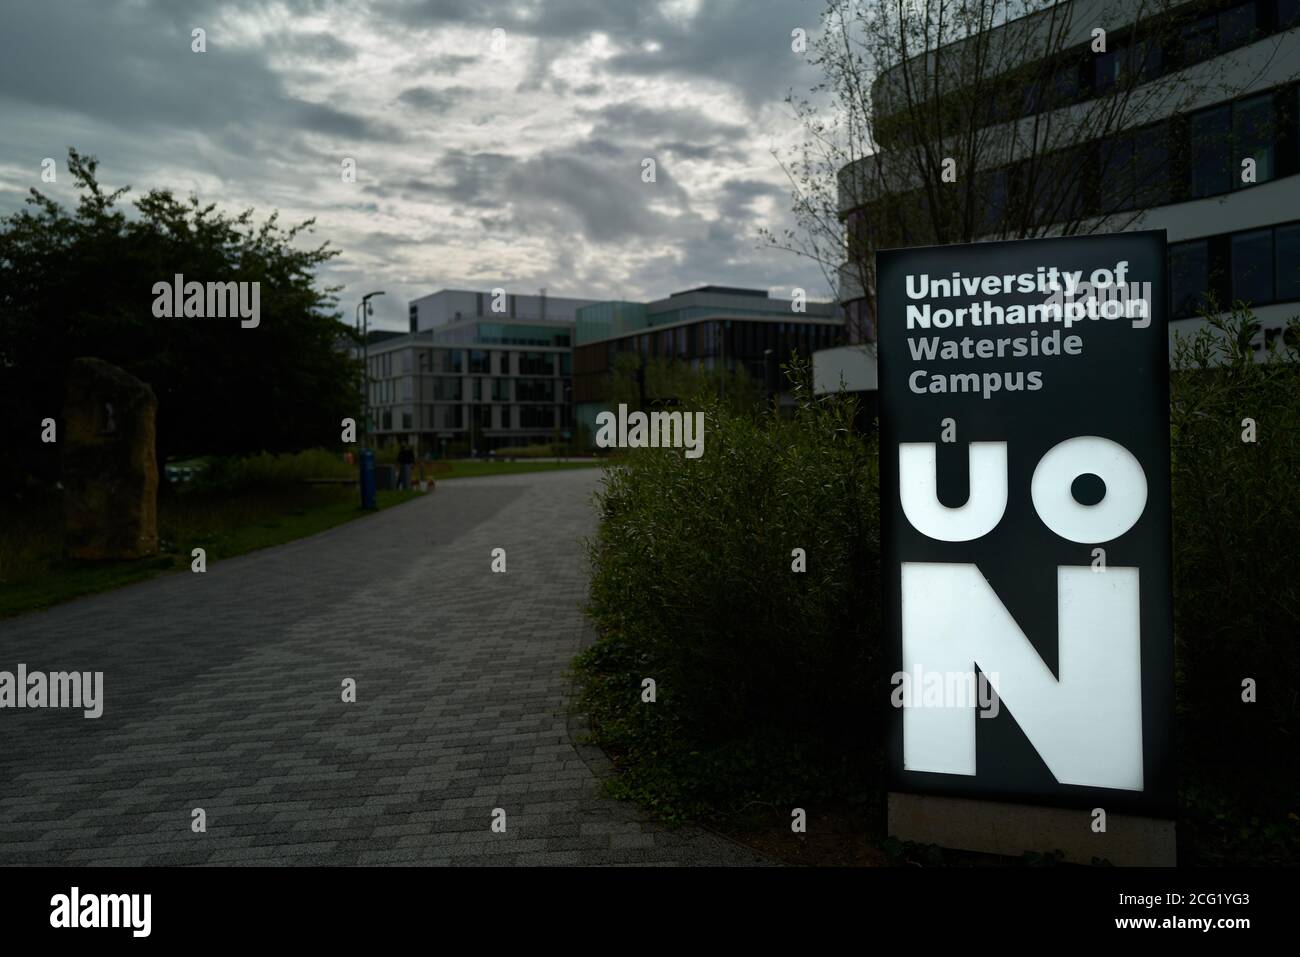 Ntotice board at the Waterside campus of the University of Northampton (UON), England. Stock Photo